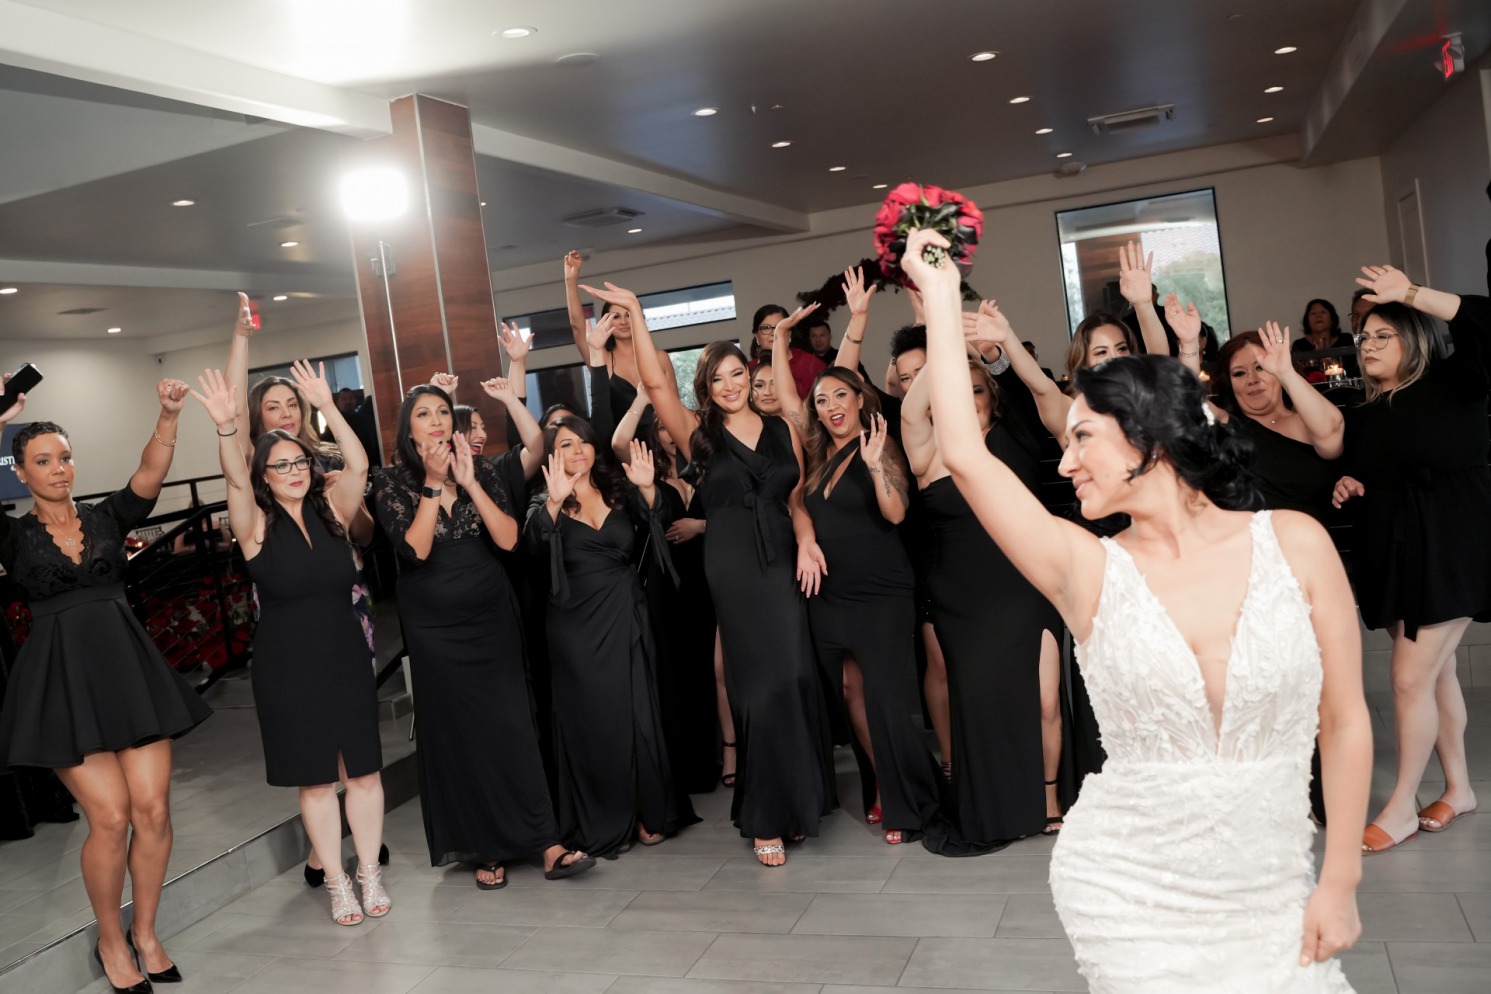 A Bride tosses the bouquet over her shoulder as her bridesmaids and guests dressed in black prepare to catch it